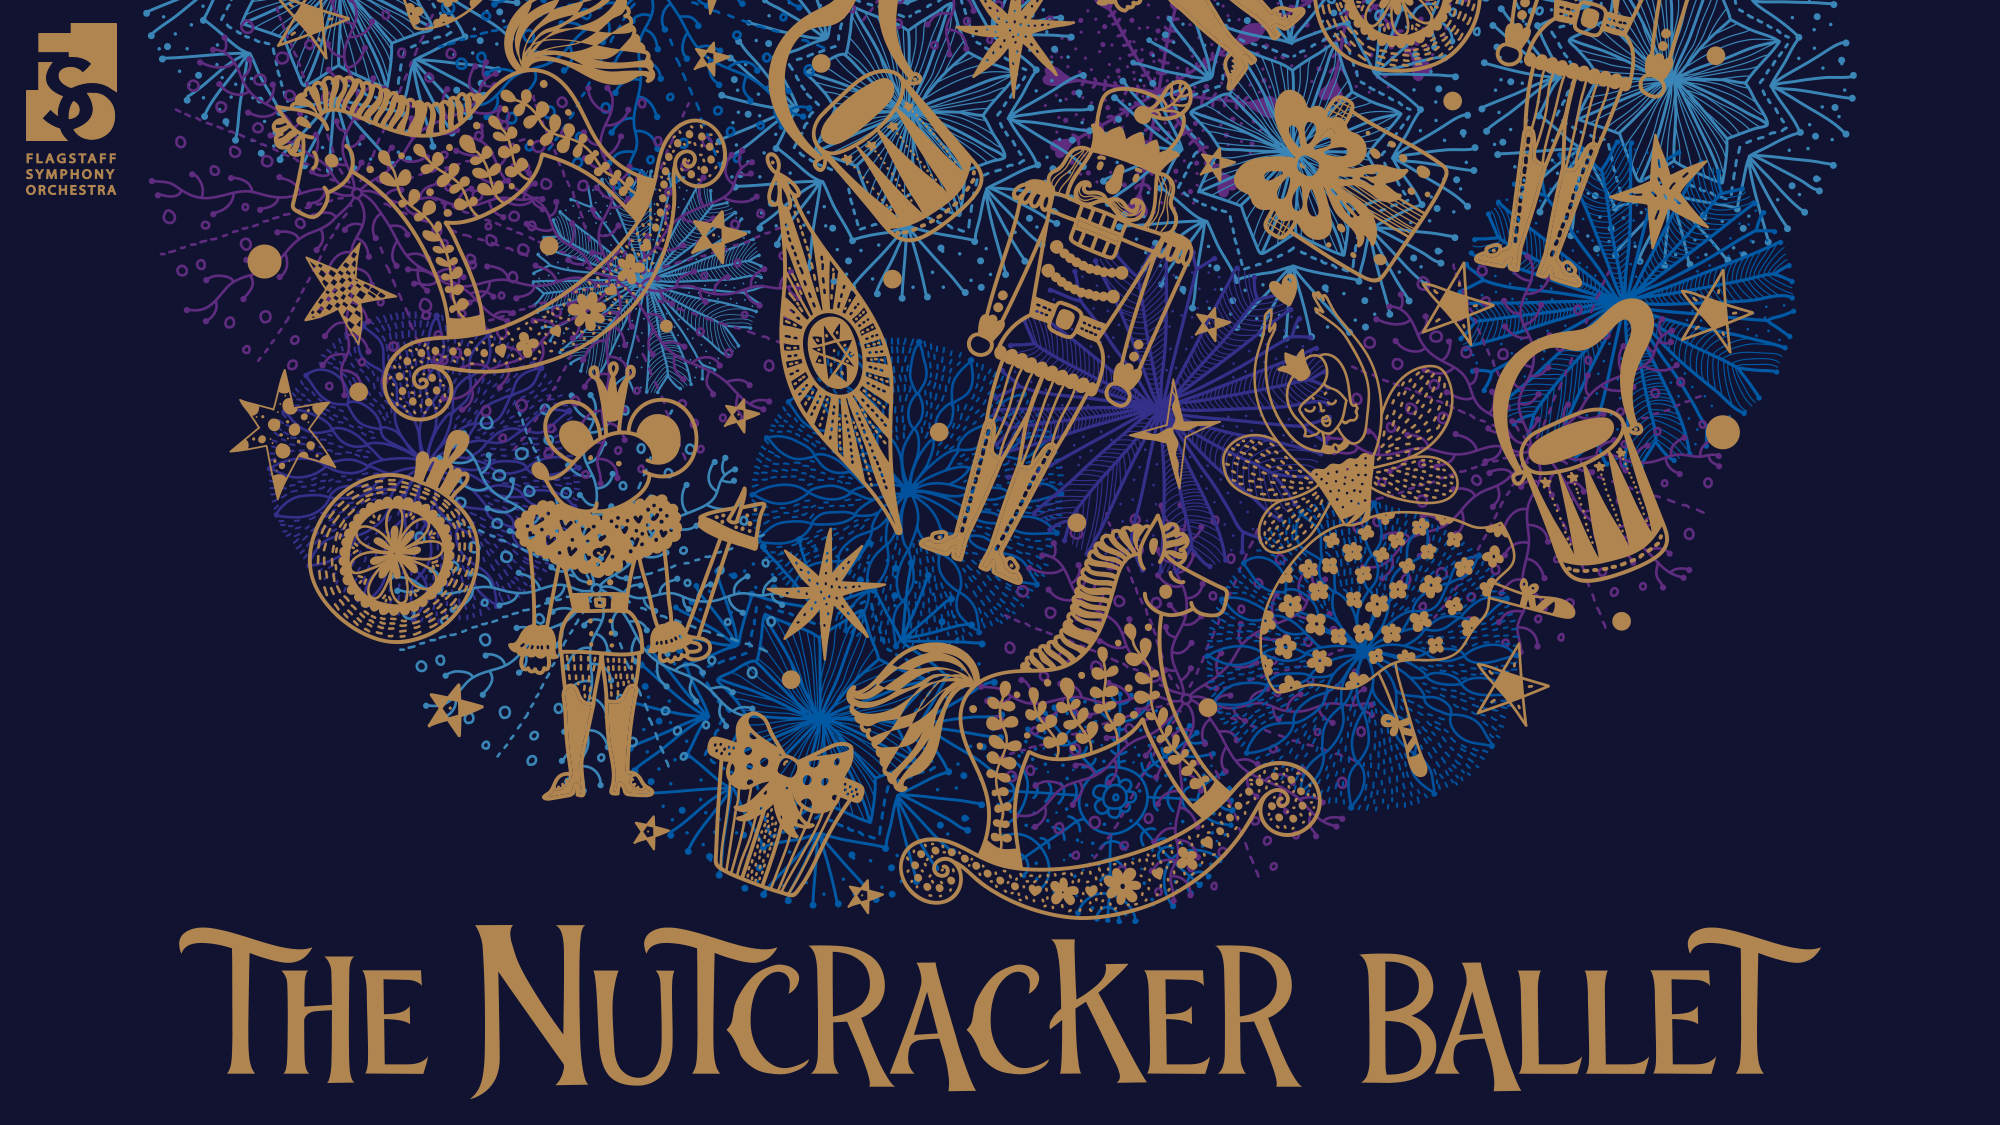 FLAGSTAFF SYMPHONY ORCHESTRA PRESENTS “THE NUTCRACKER BALLET” DECEMBER 3RD AND 4TH, 2021